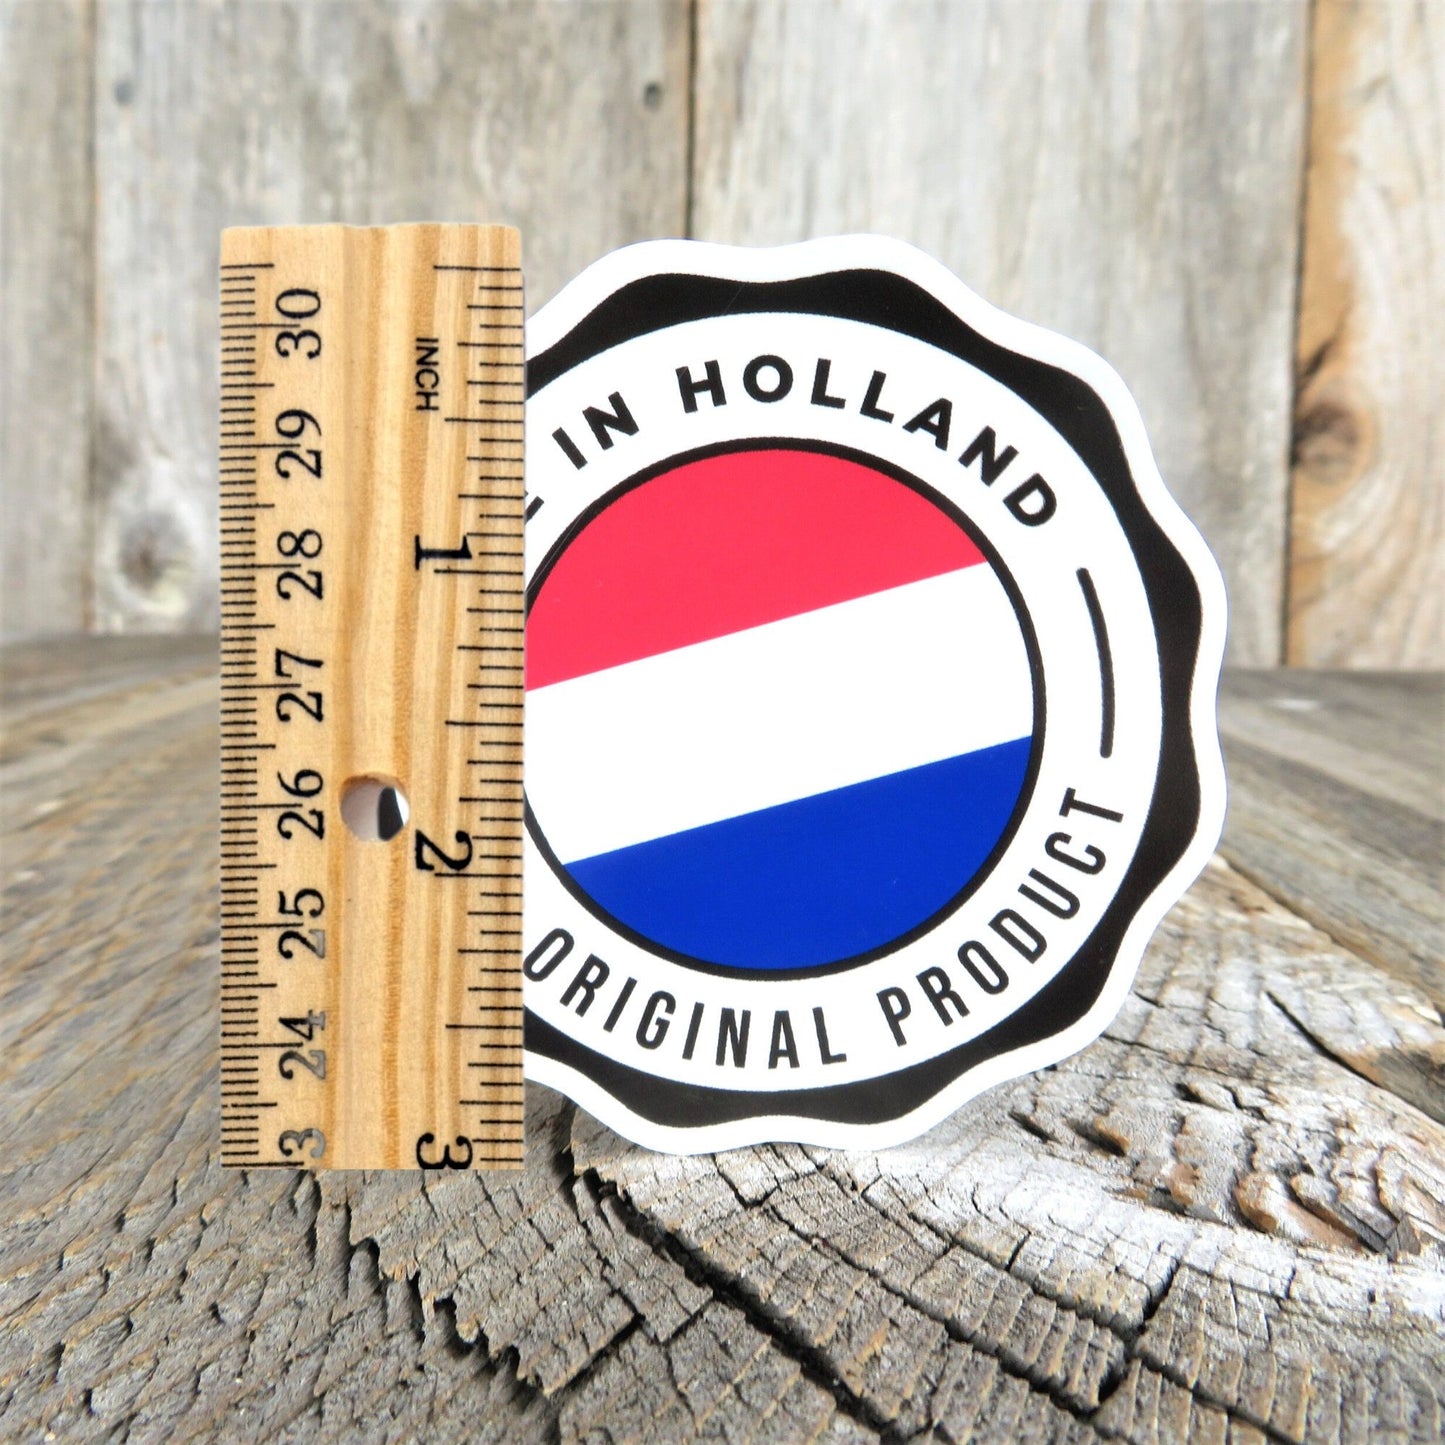 Made in Holland Sticker Original Product Born in Holland Red White Blue Flag Netherlands Water Bottle